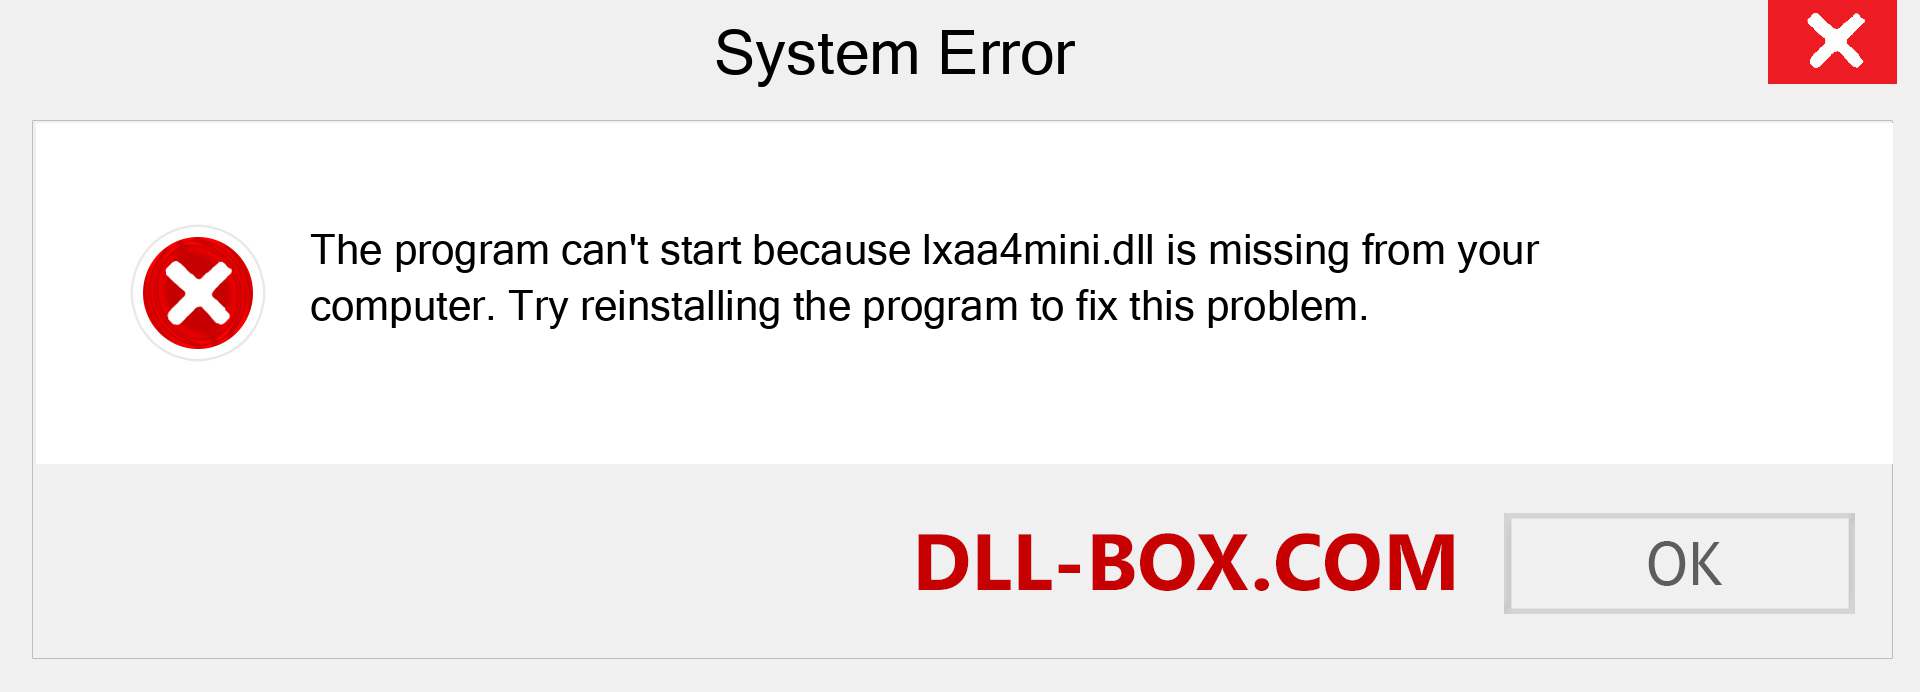  lxaa4mini.dll file is missing?. Download for Windows 7, 8, 10 - Fix  lxaa4mini dll Missing Error on Windows, photos, images